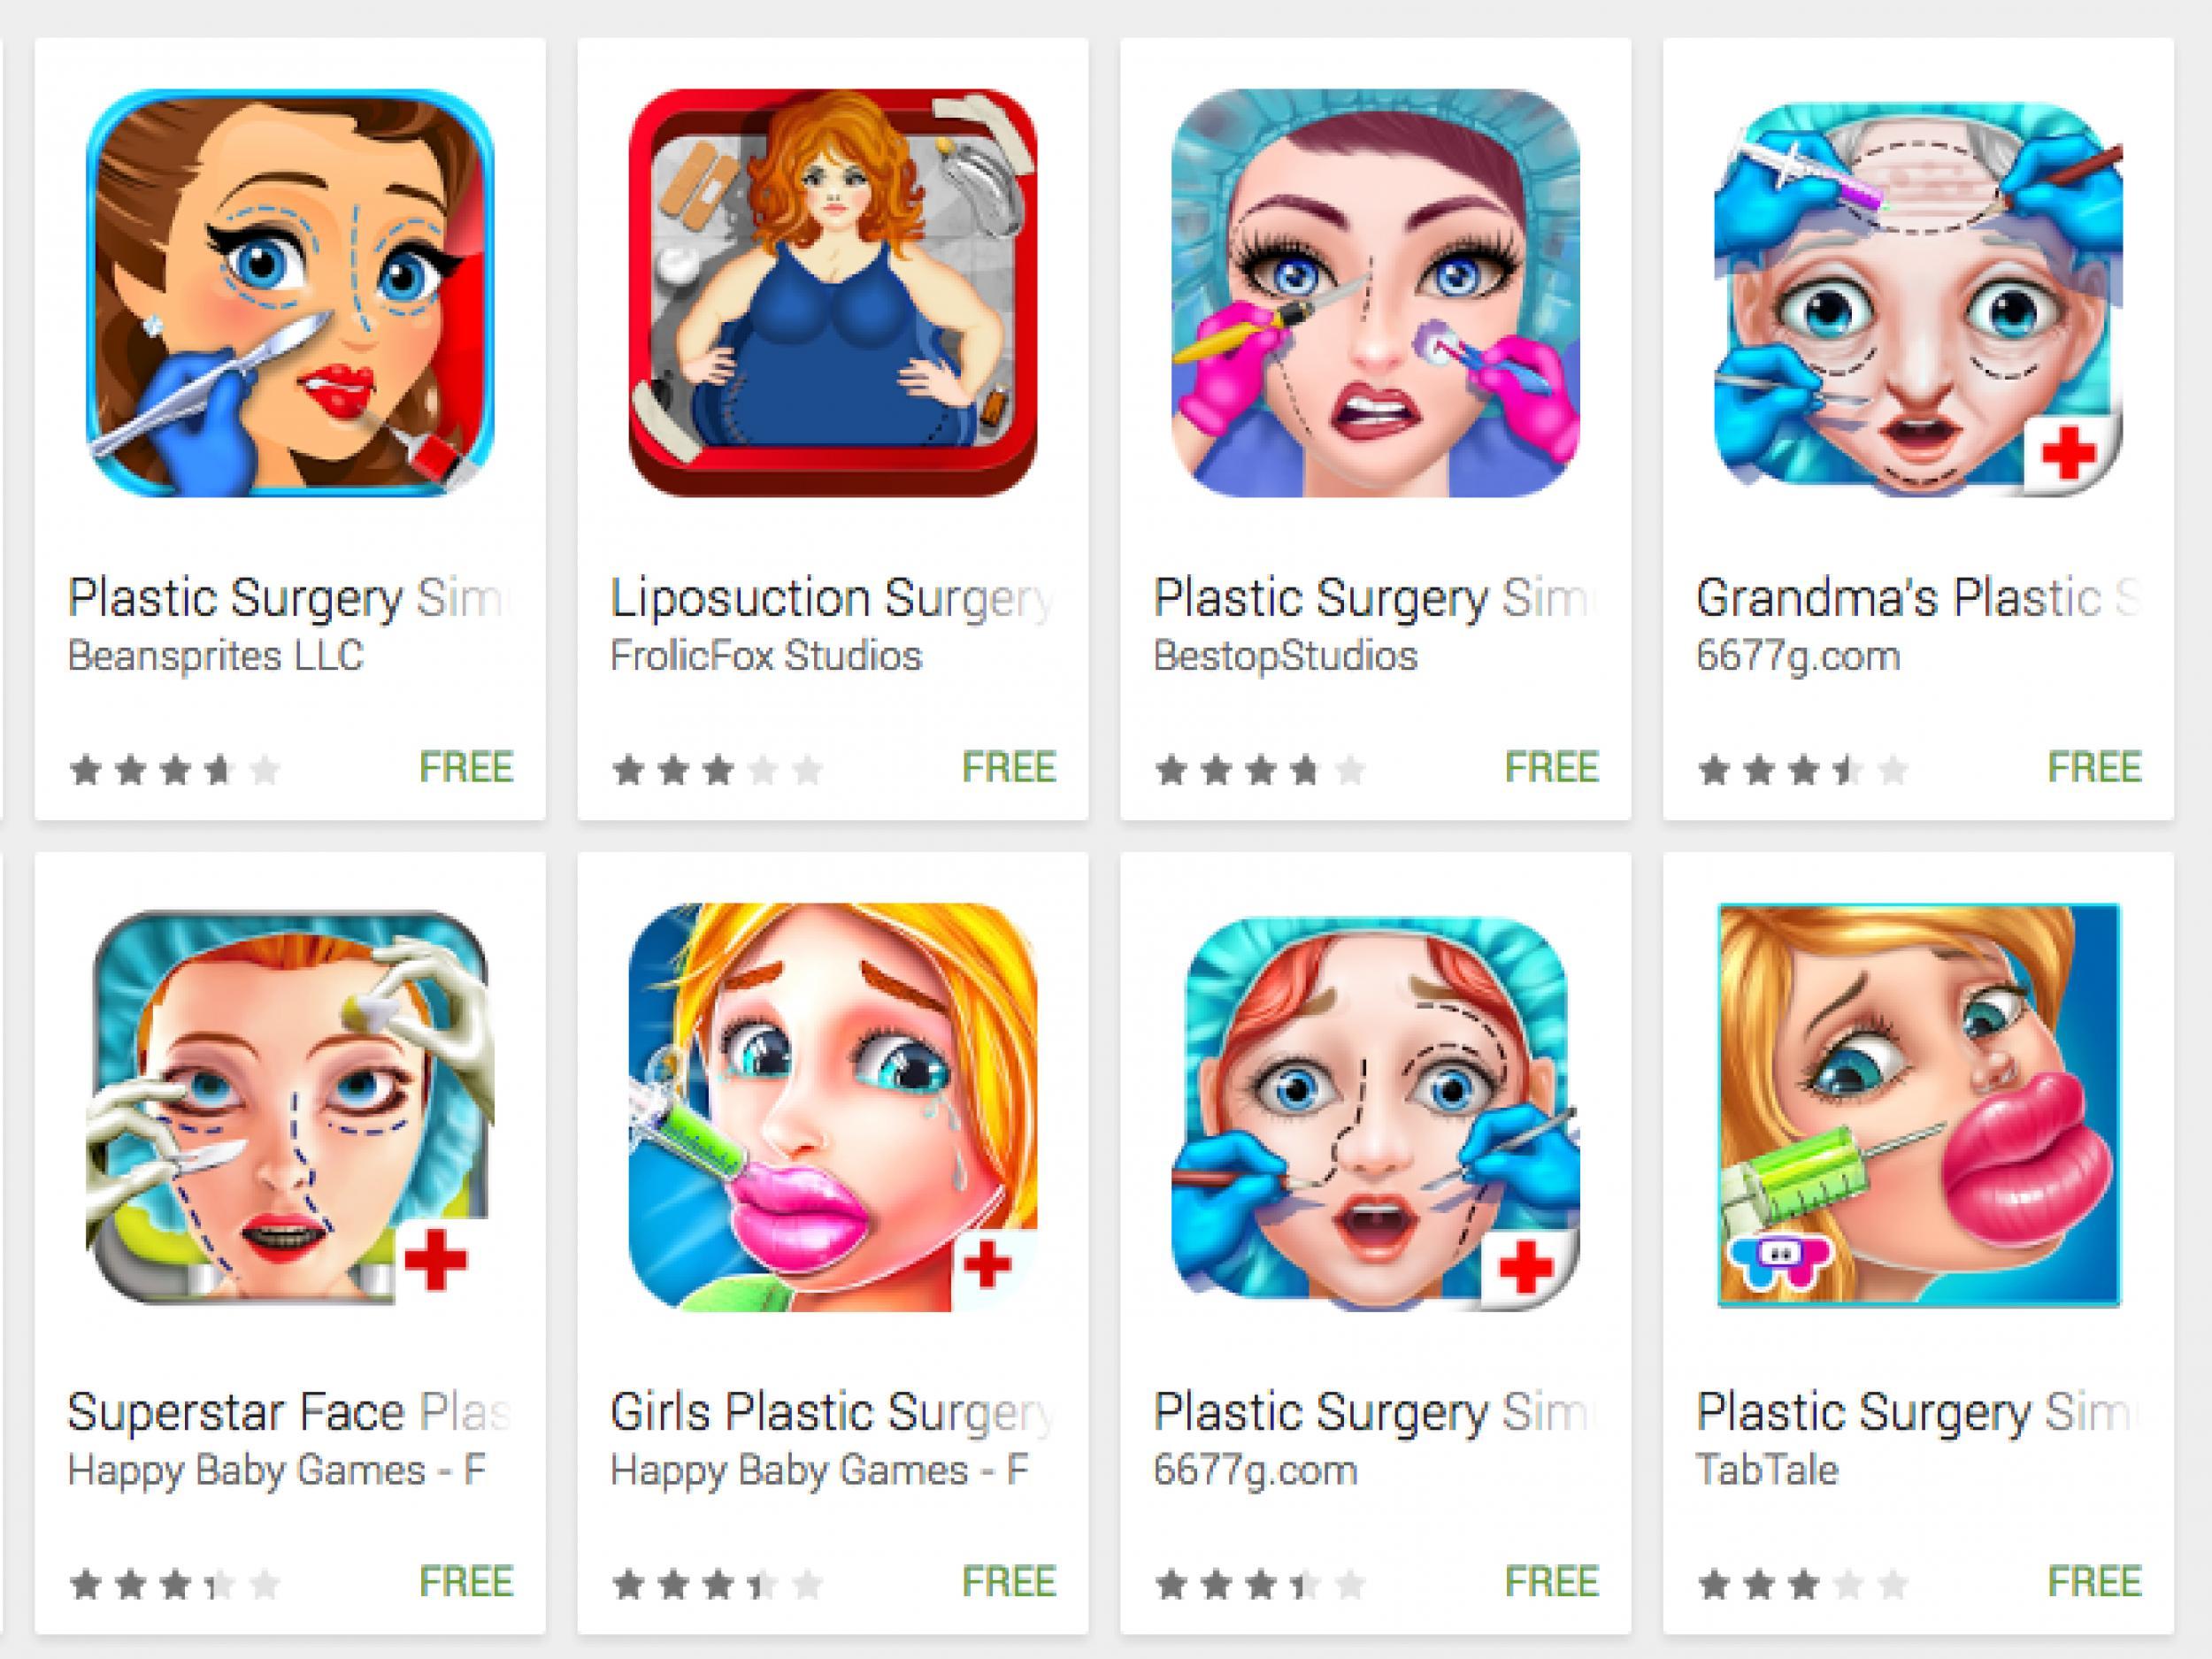 There are hundreds of pinkified, princess-y, saccharine-laced apps available for free download that teach kids physical ‘perfection’ is the end and cosmetic surgery is the means